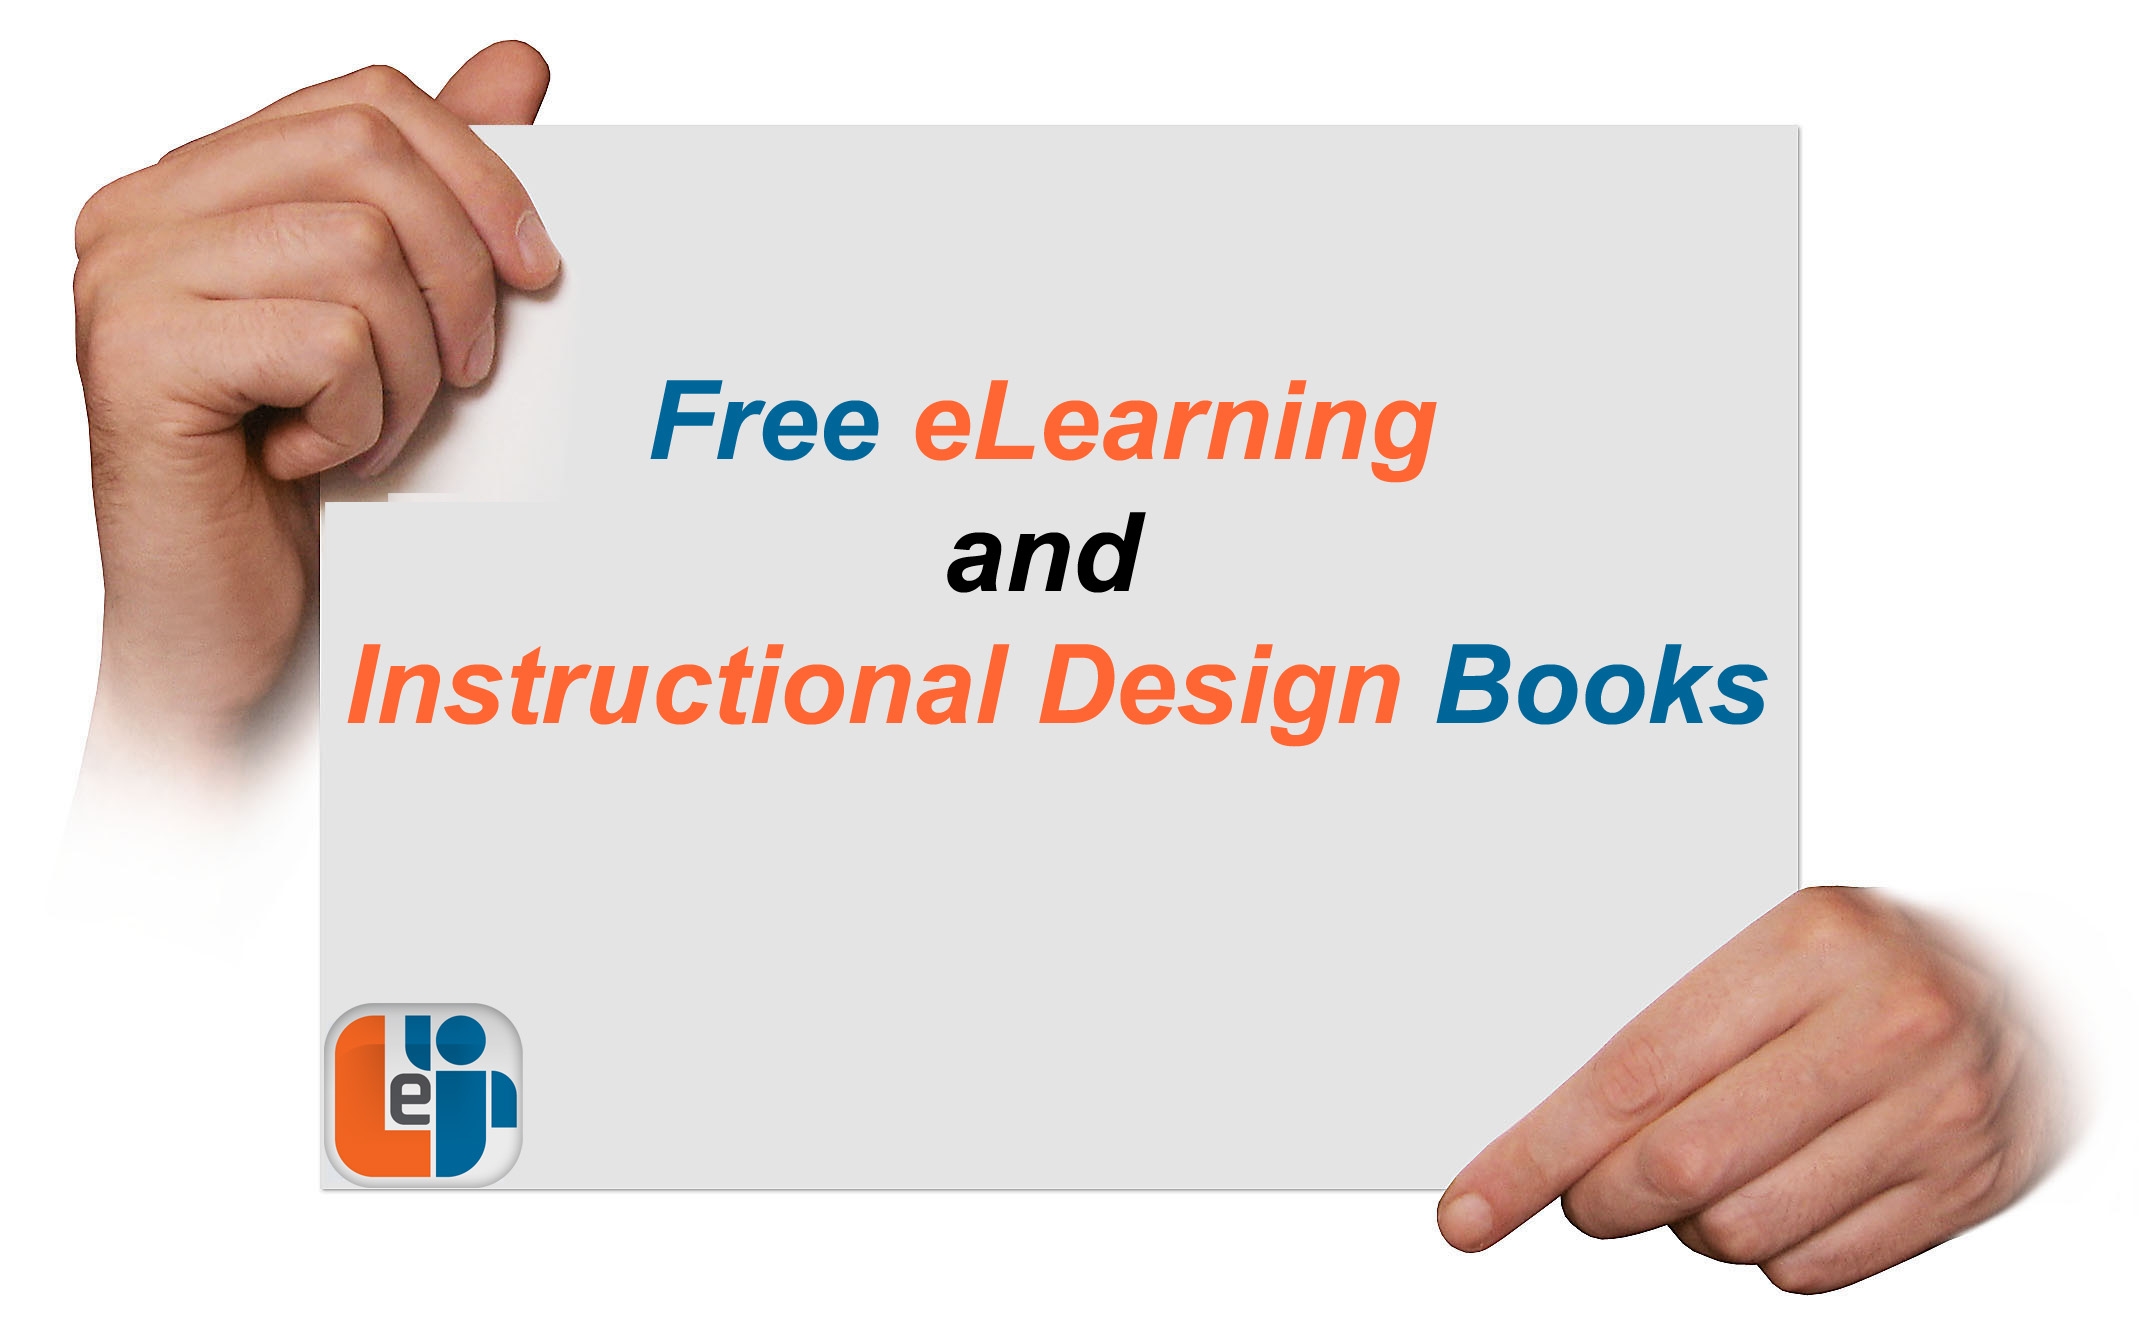 Free eLearning And Instructional Design Books